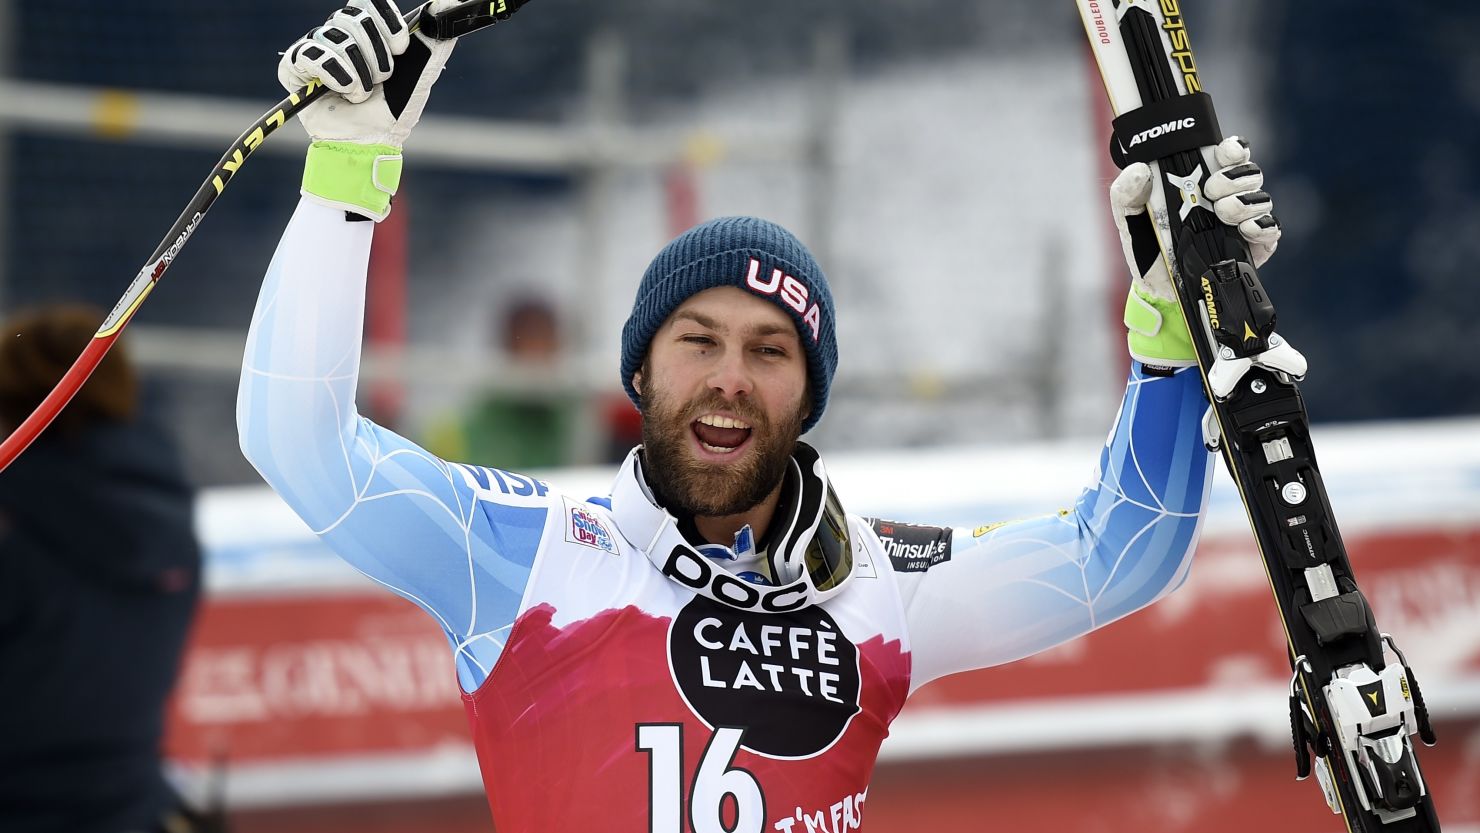 Travis Ganong won his first alpine skiing race Sunday when he captured a downhill in Italy. 